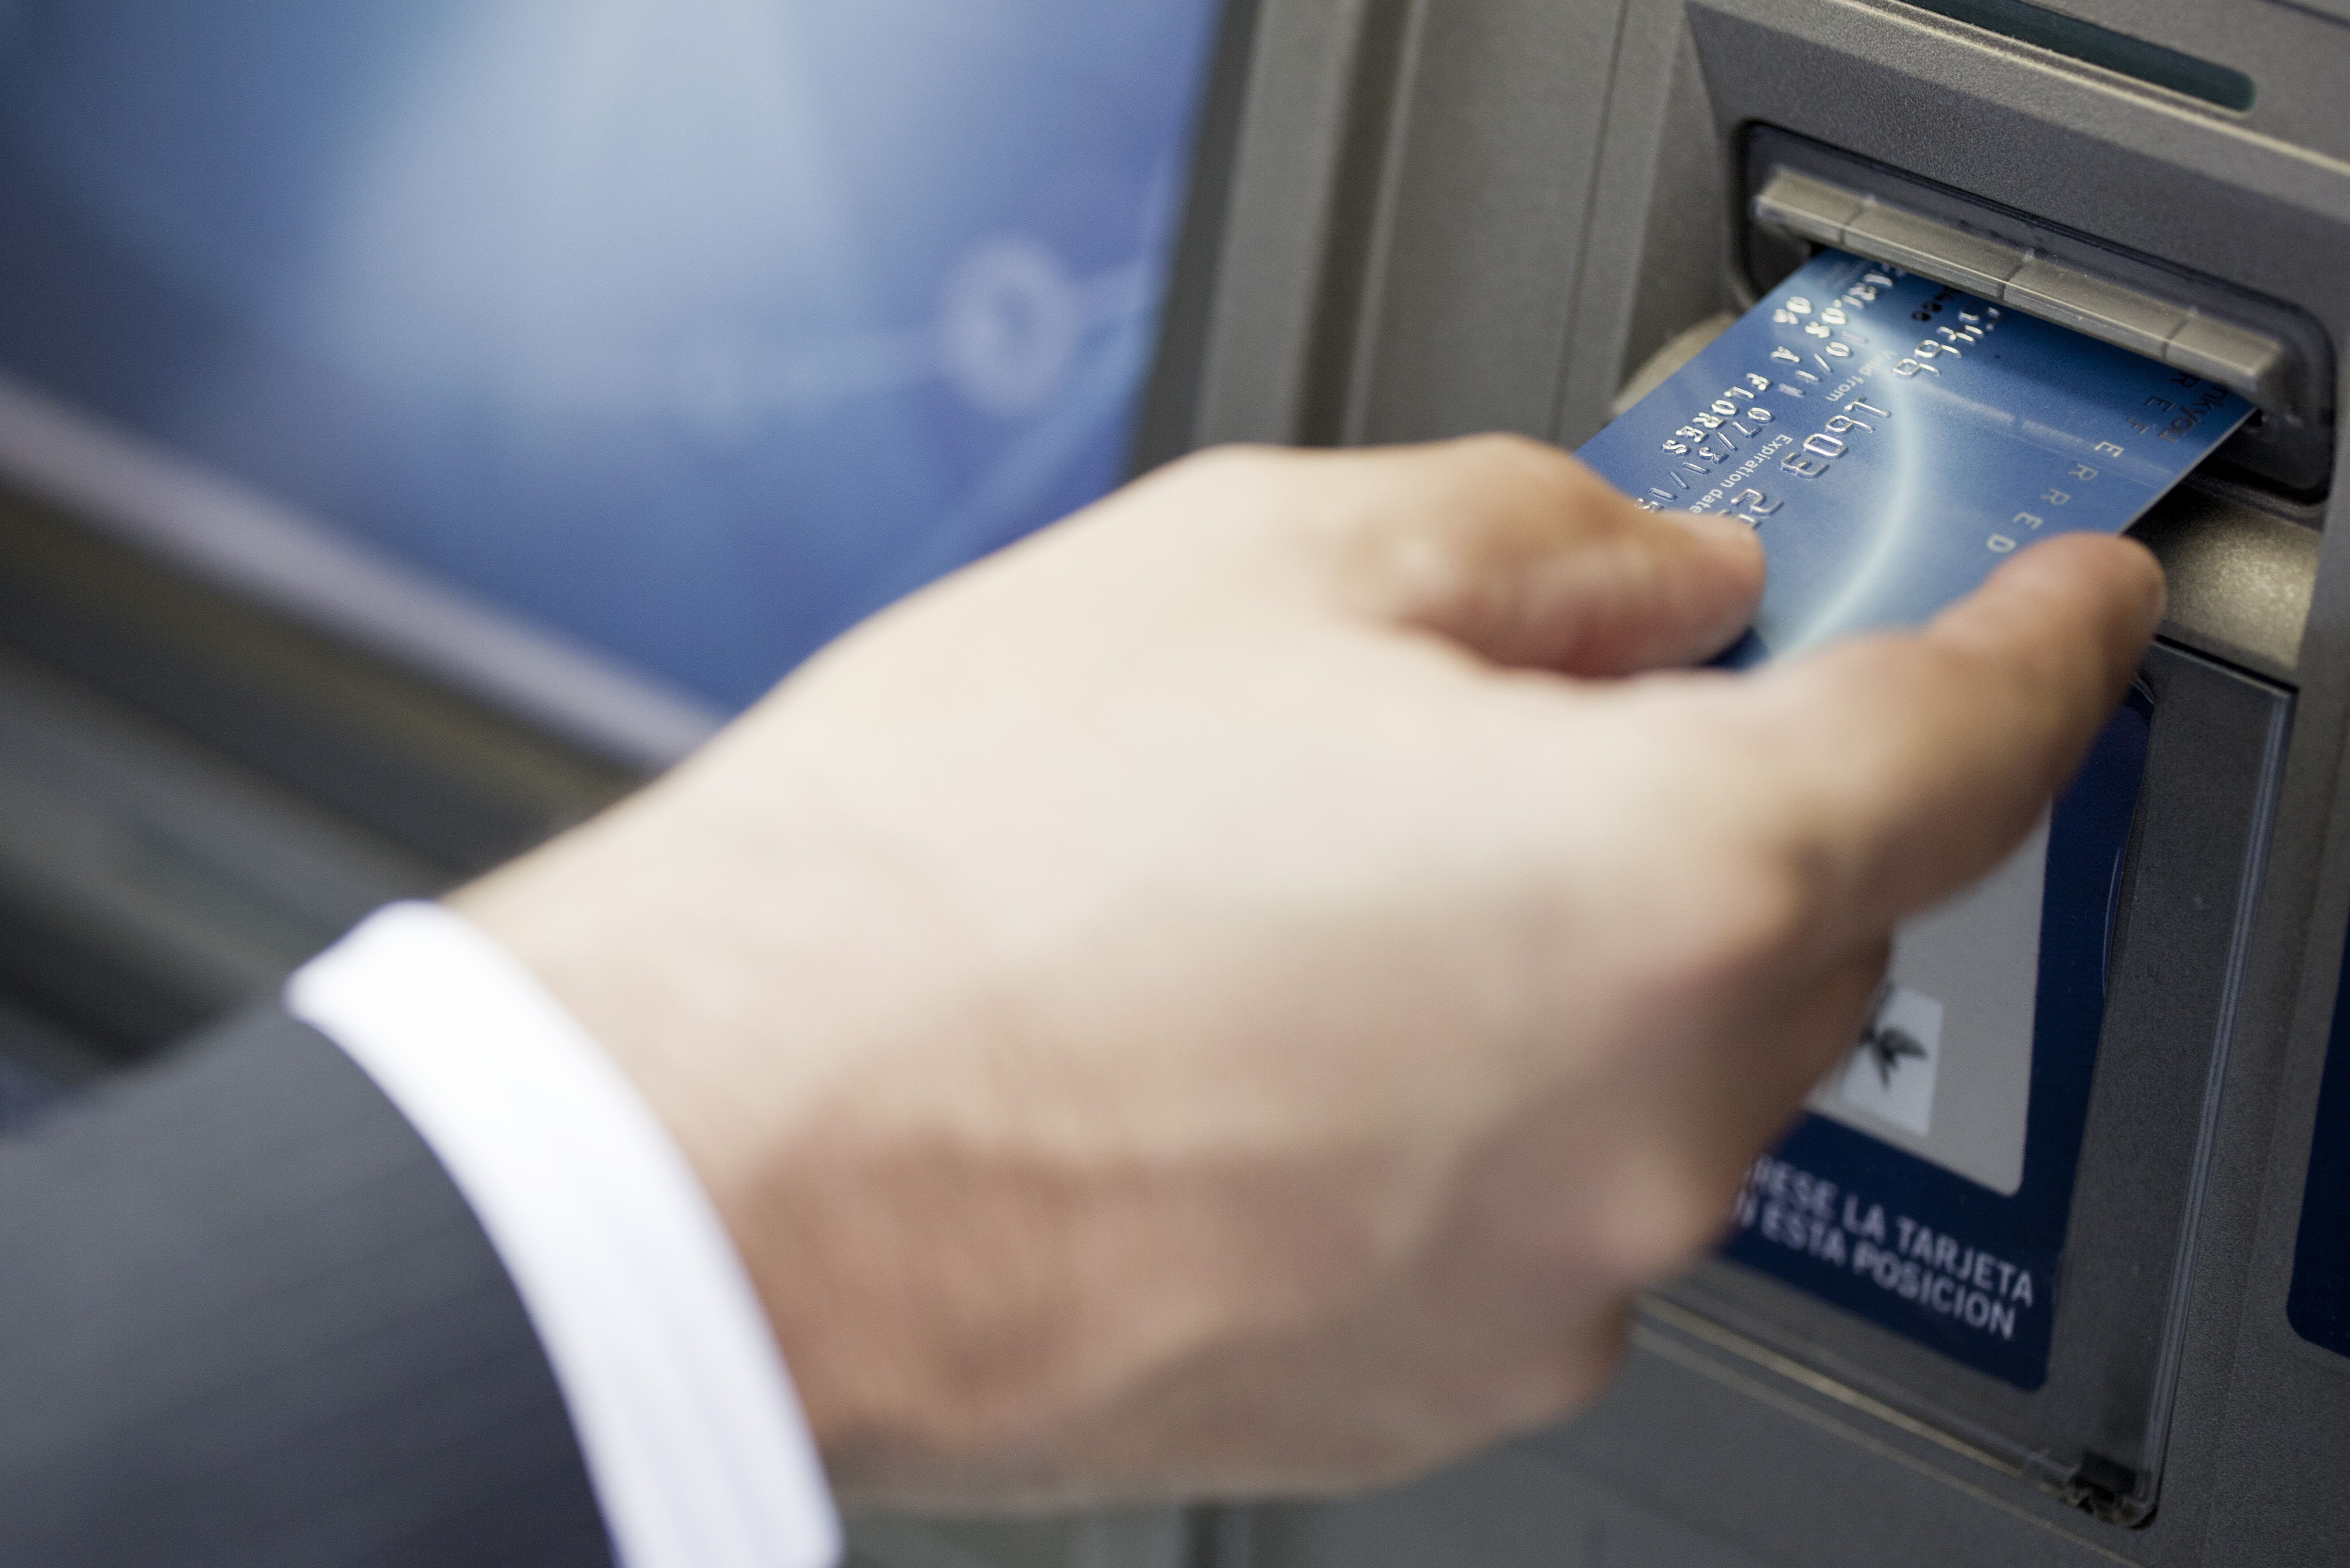 U.S. Bank and Chase Free Checking Accounts: Hidden Fees or Free?